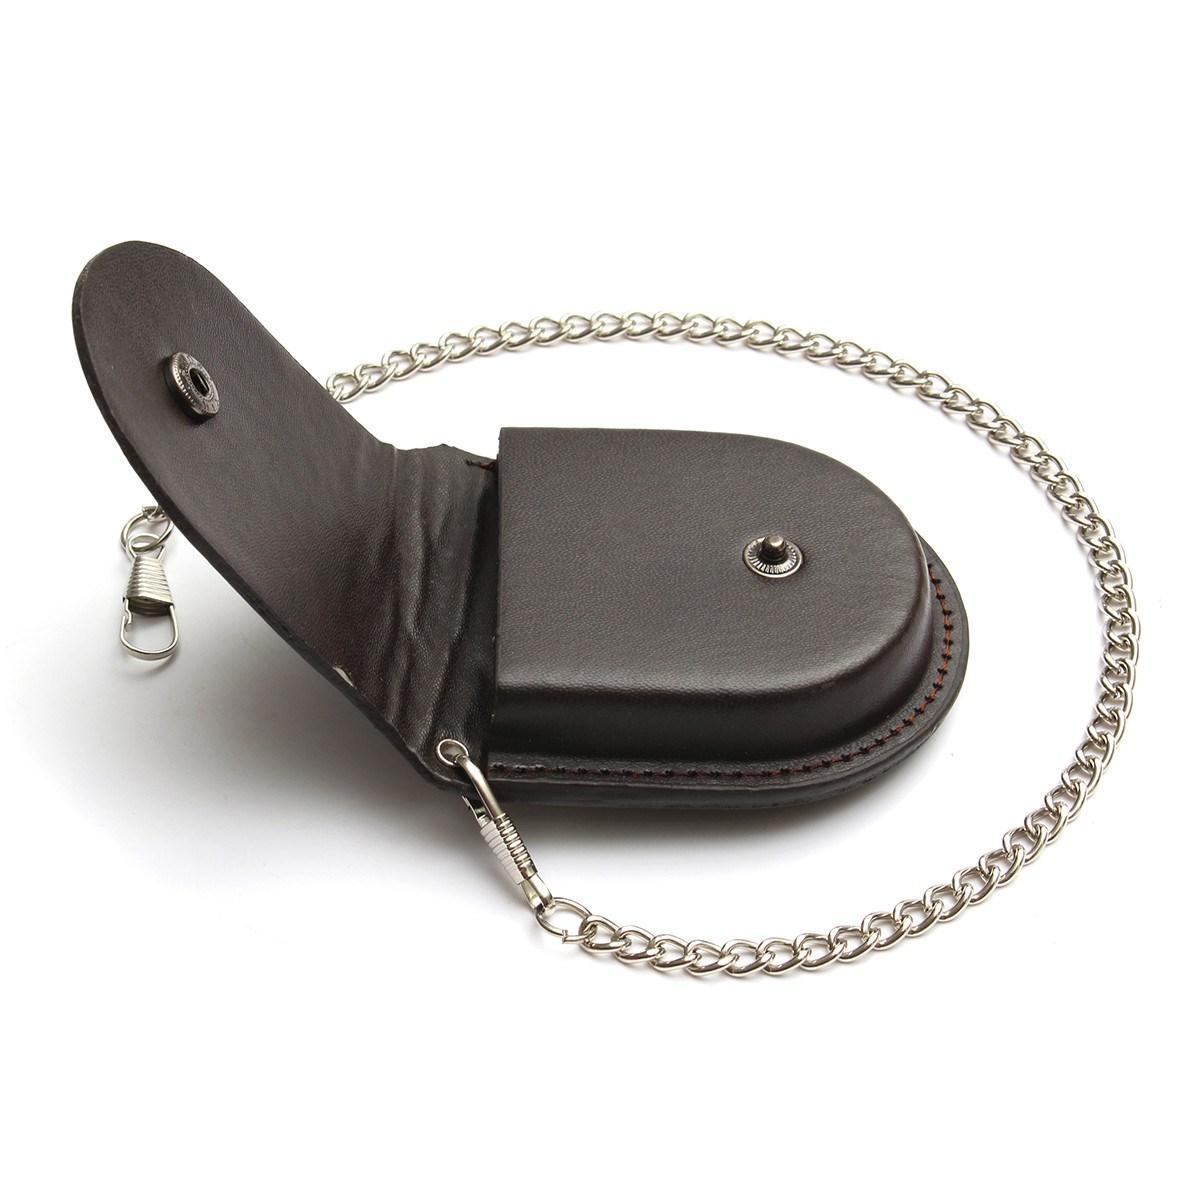 [ postage our company charge ] pocket watch holder box pouch portable waist bag leather storage case BB5048-02bk 2. black 